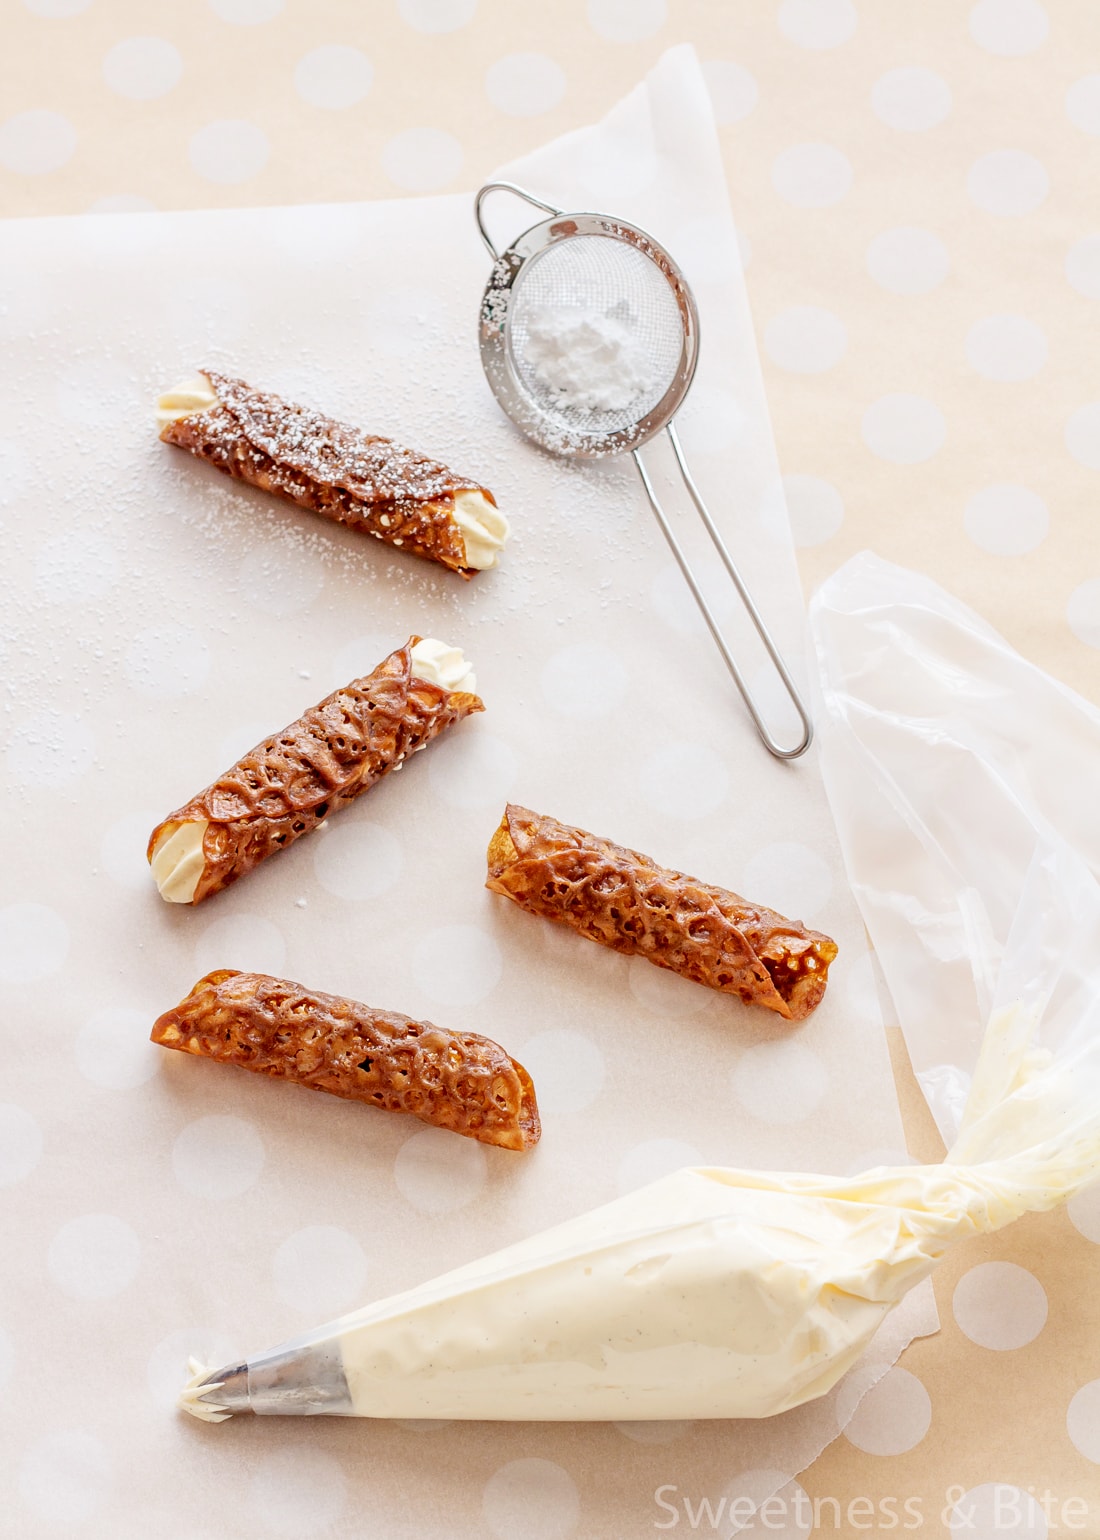 Four brandy snaps on a piece of baking paper, with a small sieve holding icing sugar.